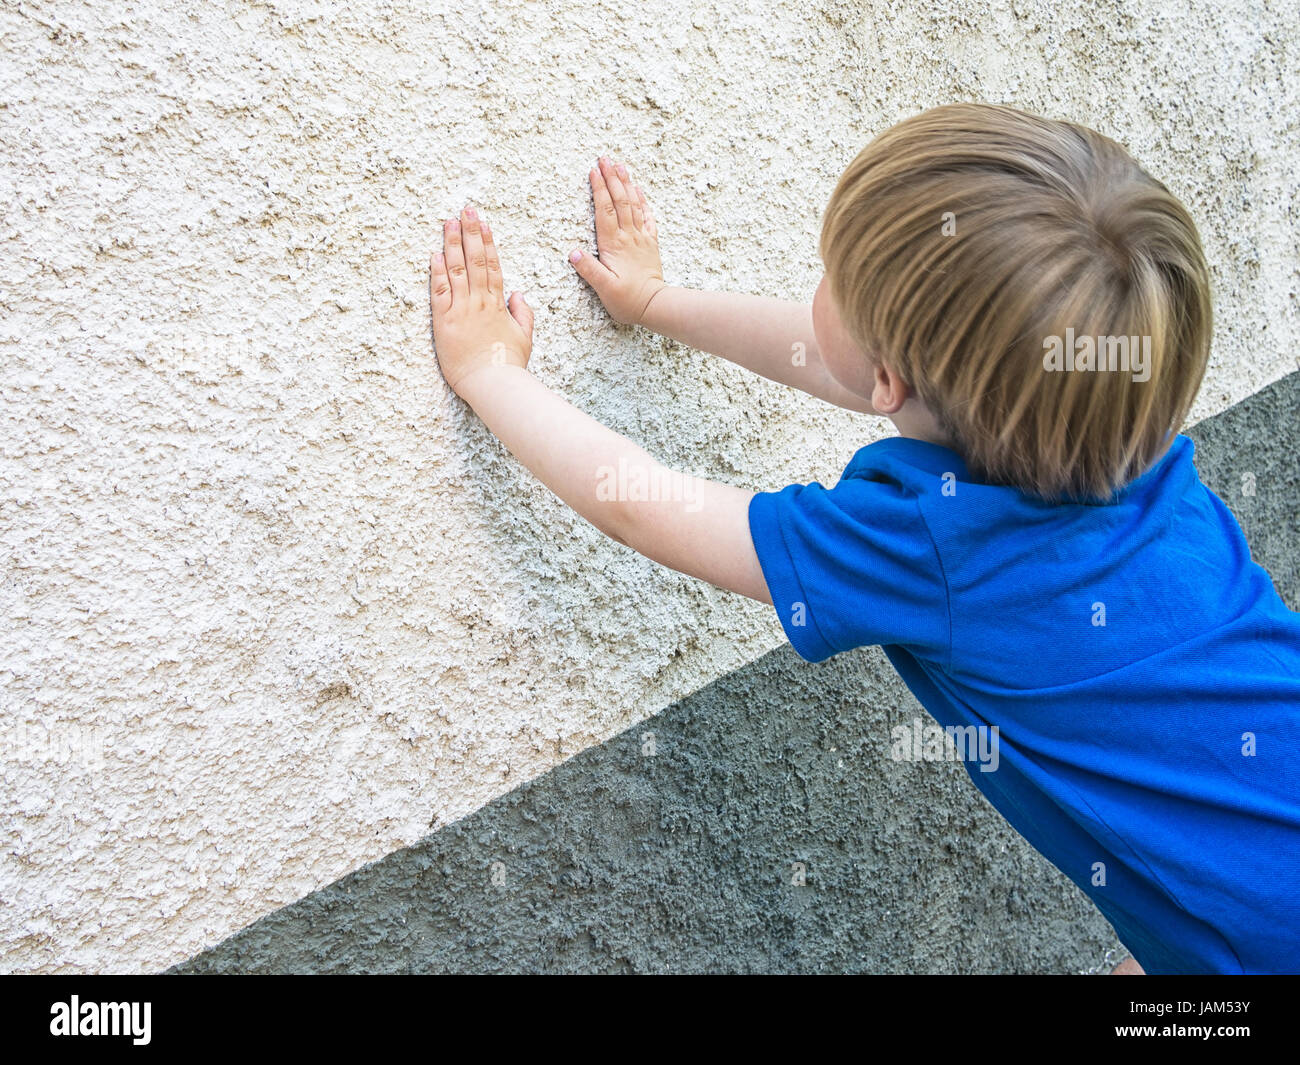 Hide and seek game. Cute blond child. Note focus on hands and wall for greater anonymity of boy. Stock Photo